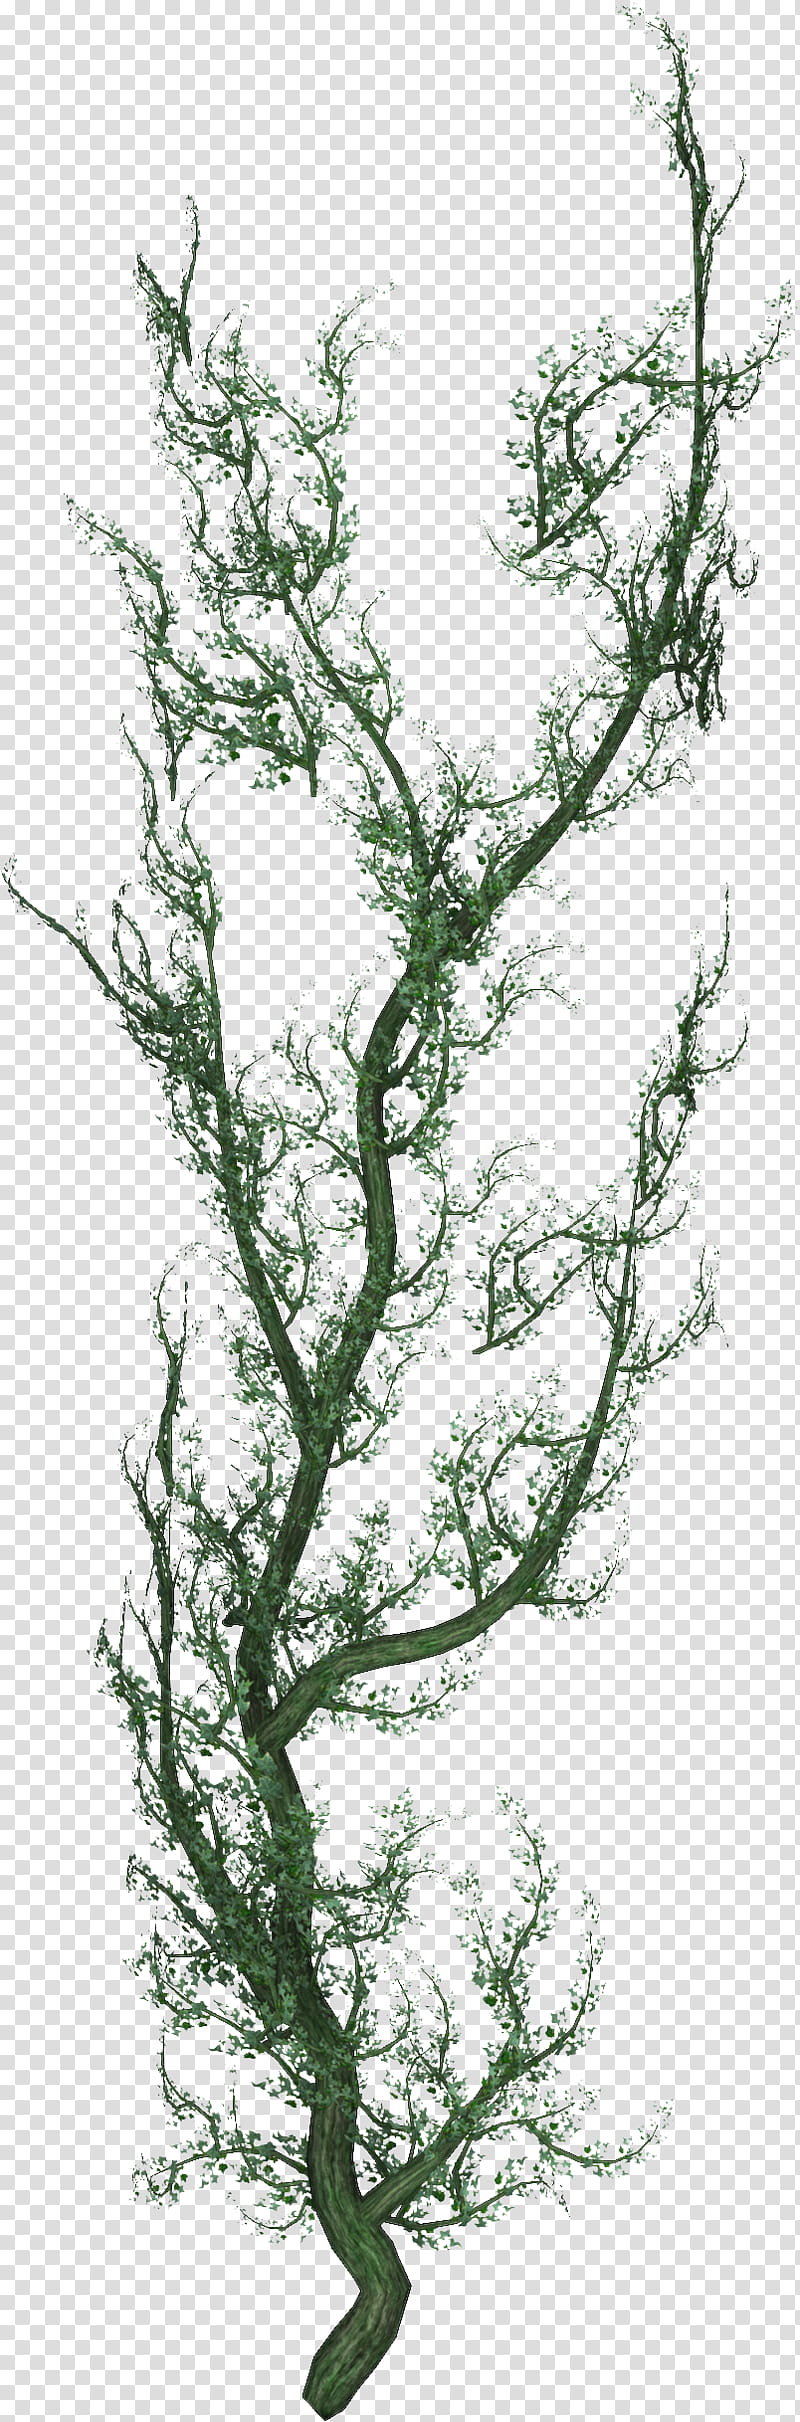 Creepers n Vines, green tree transparent background PNG clipart